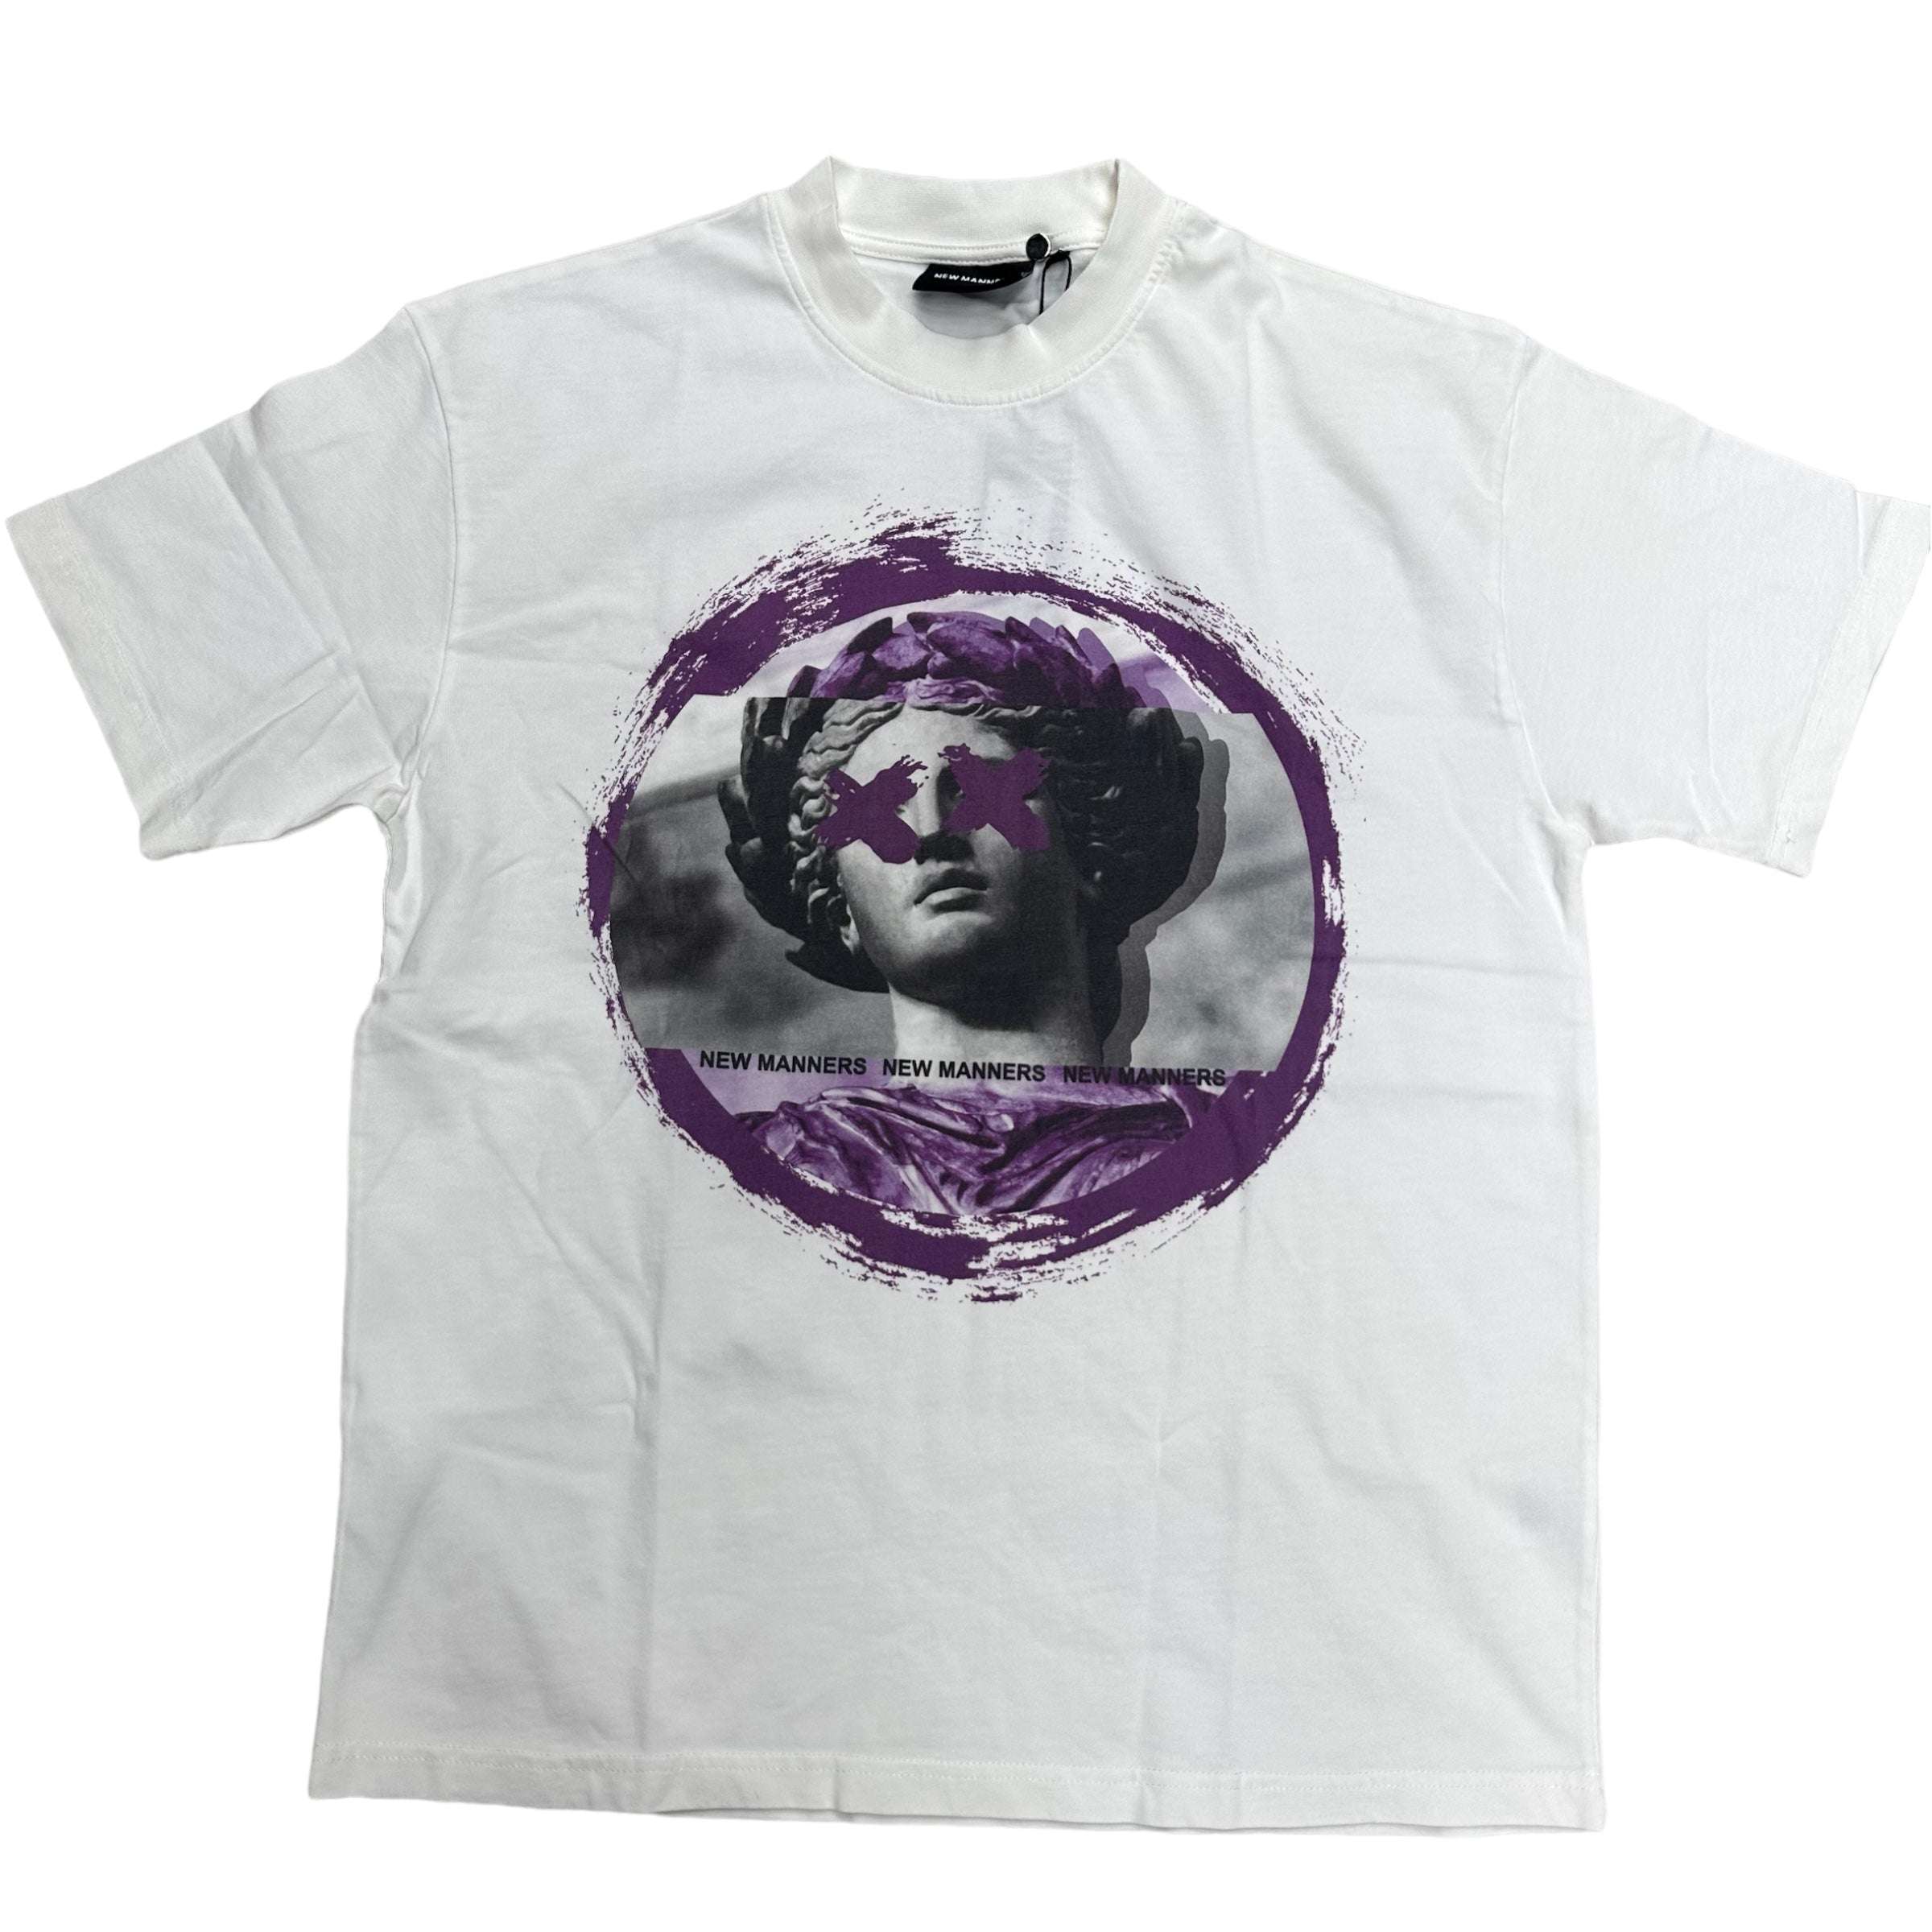 Manners OverSize Blinded T-shirt Acid White Purple